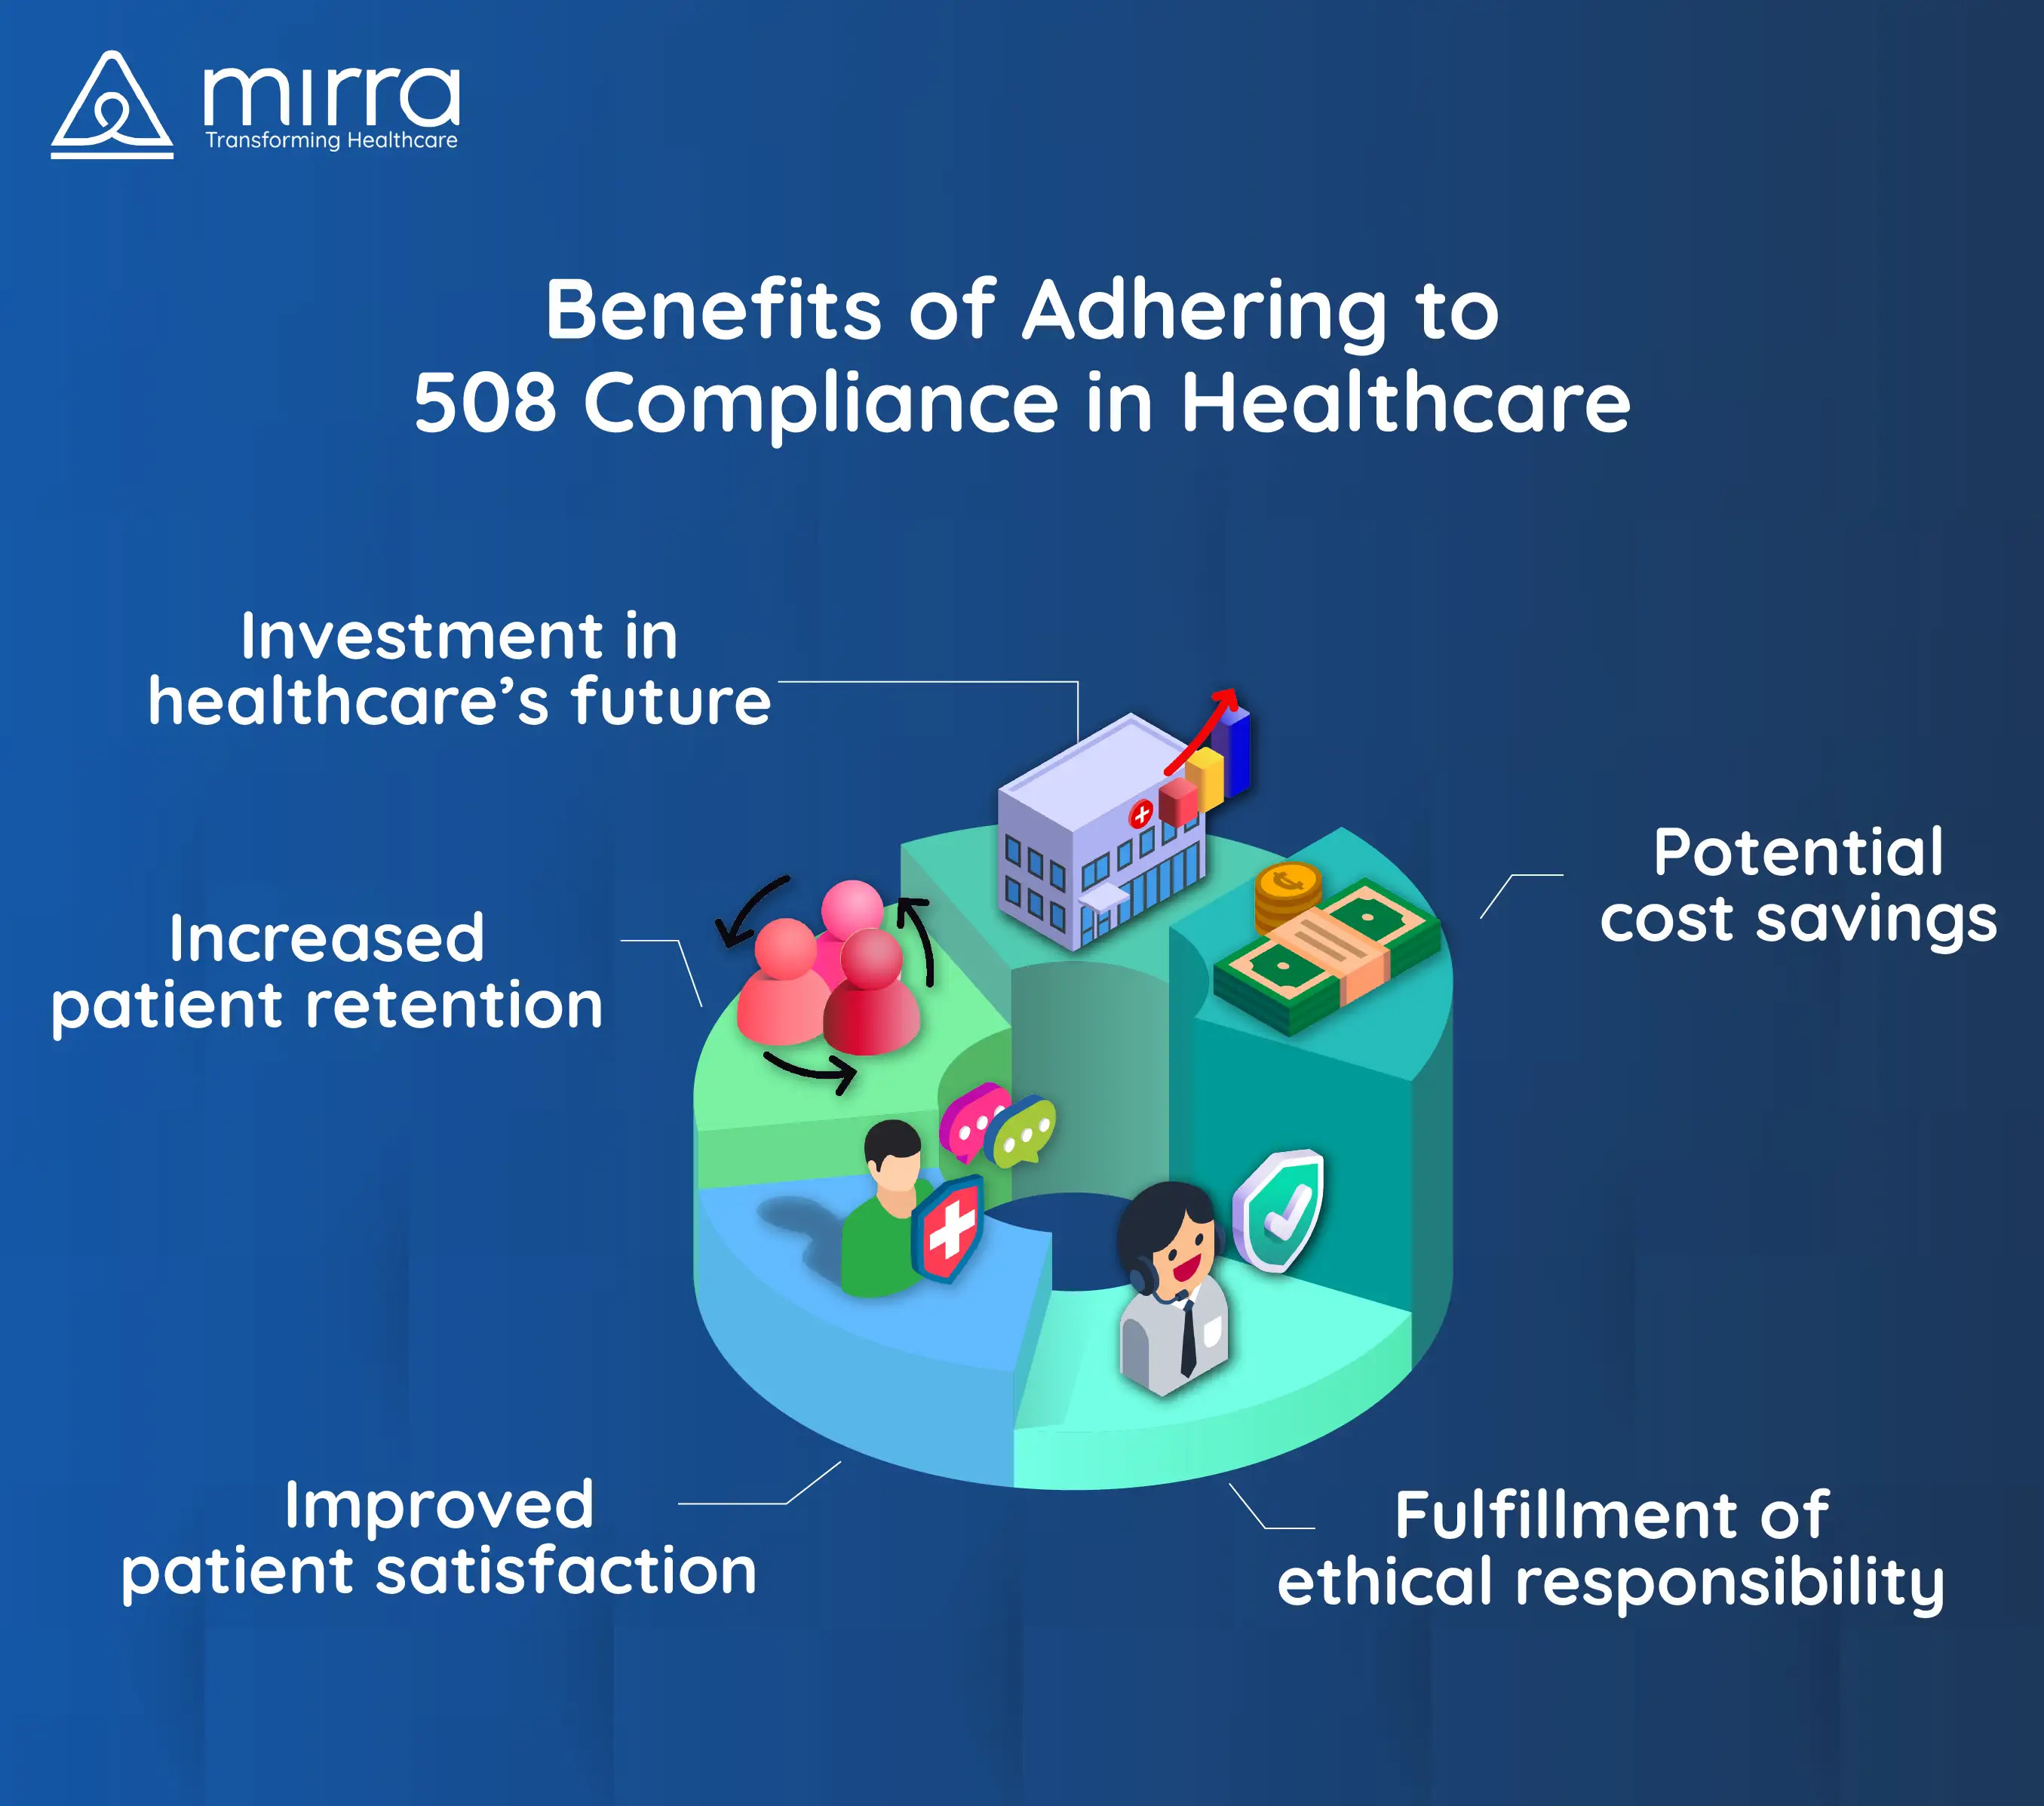 The Benefits of 508 Compliance in Healthcare